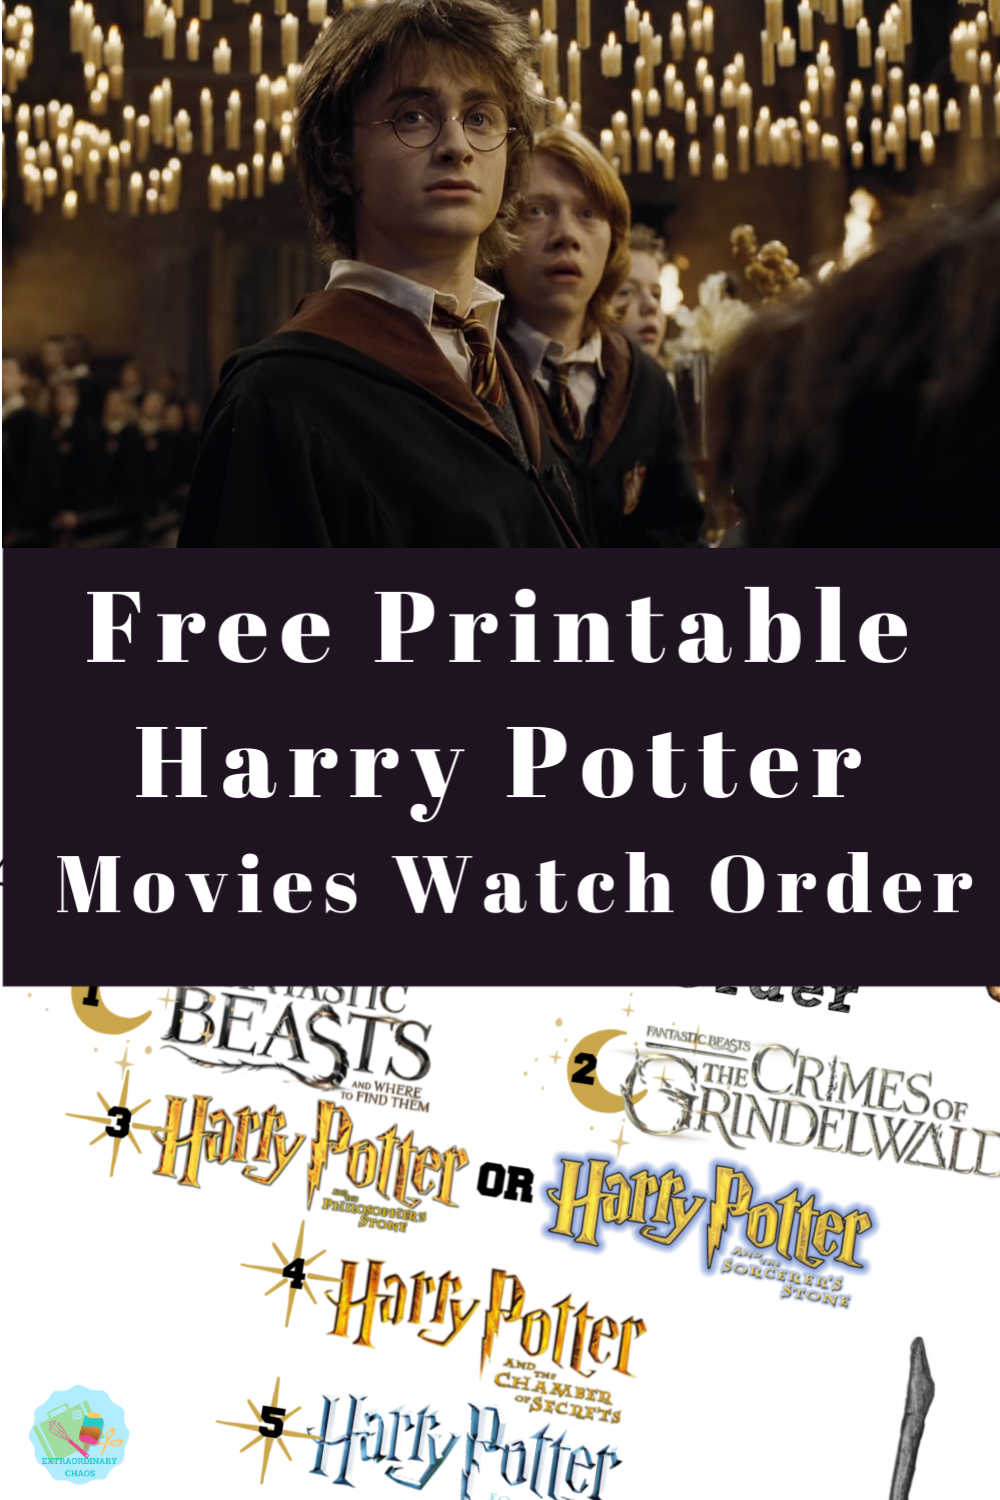 Free Printable Harry Potter Movies Watch Order